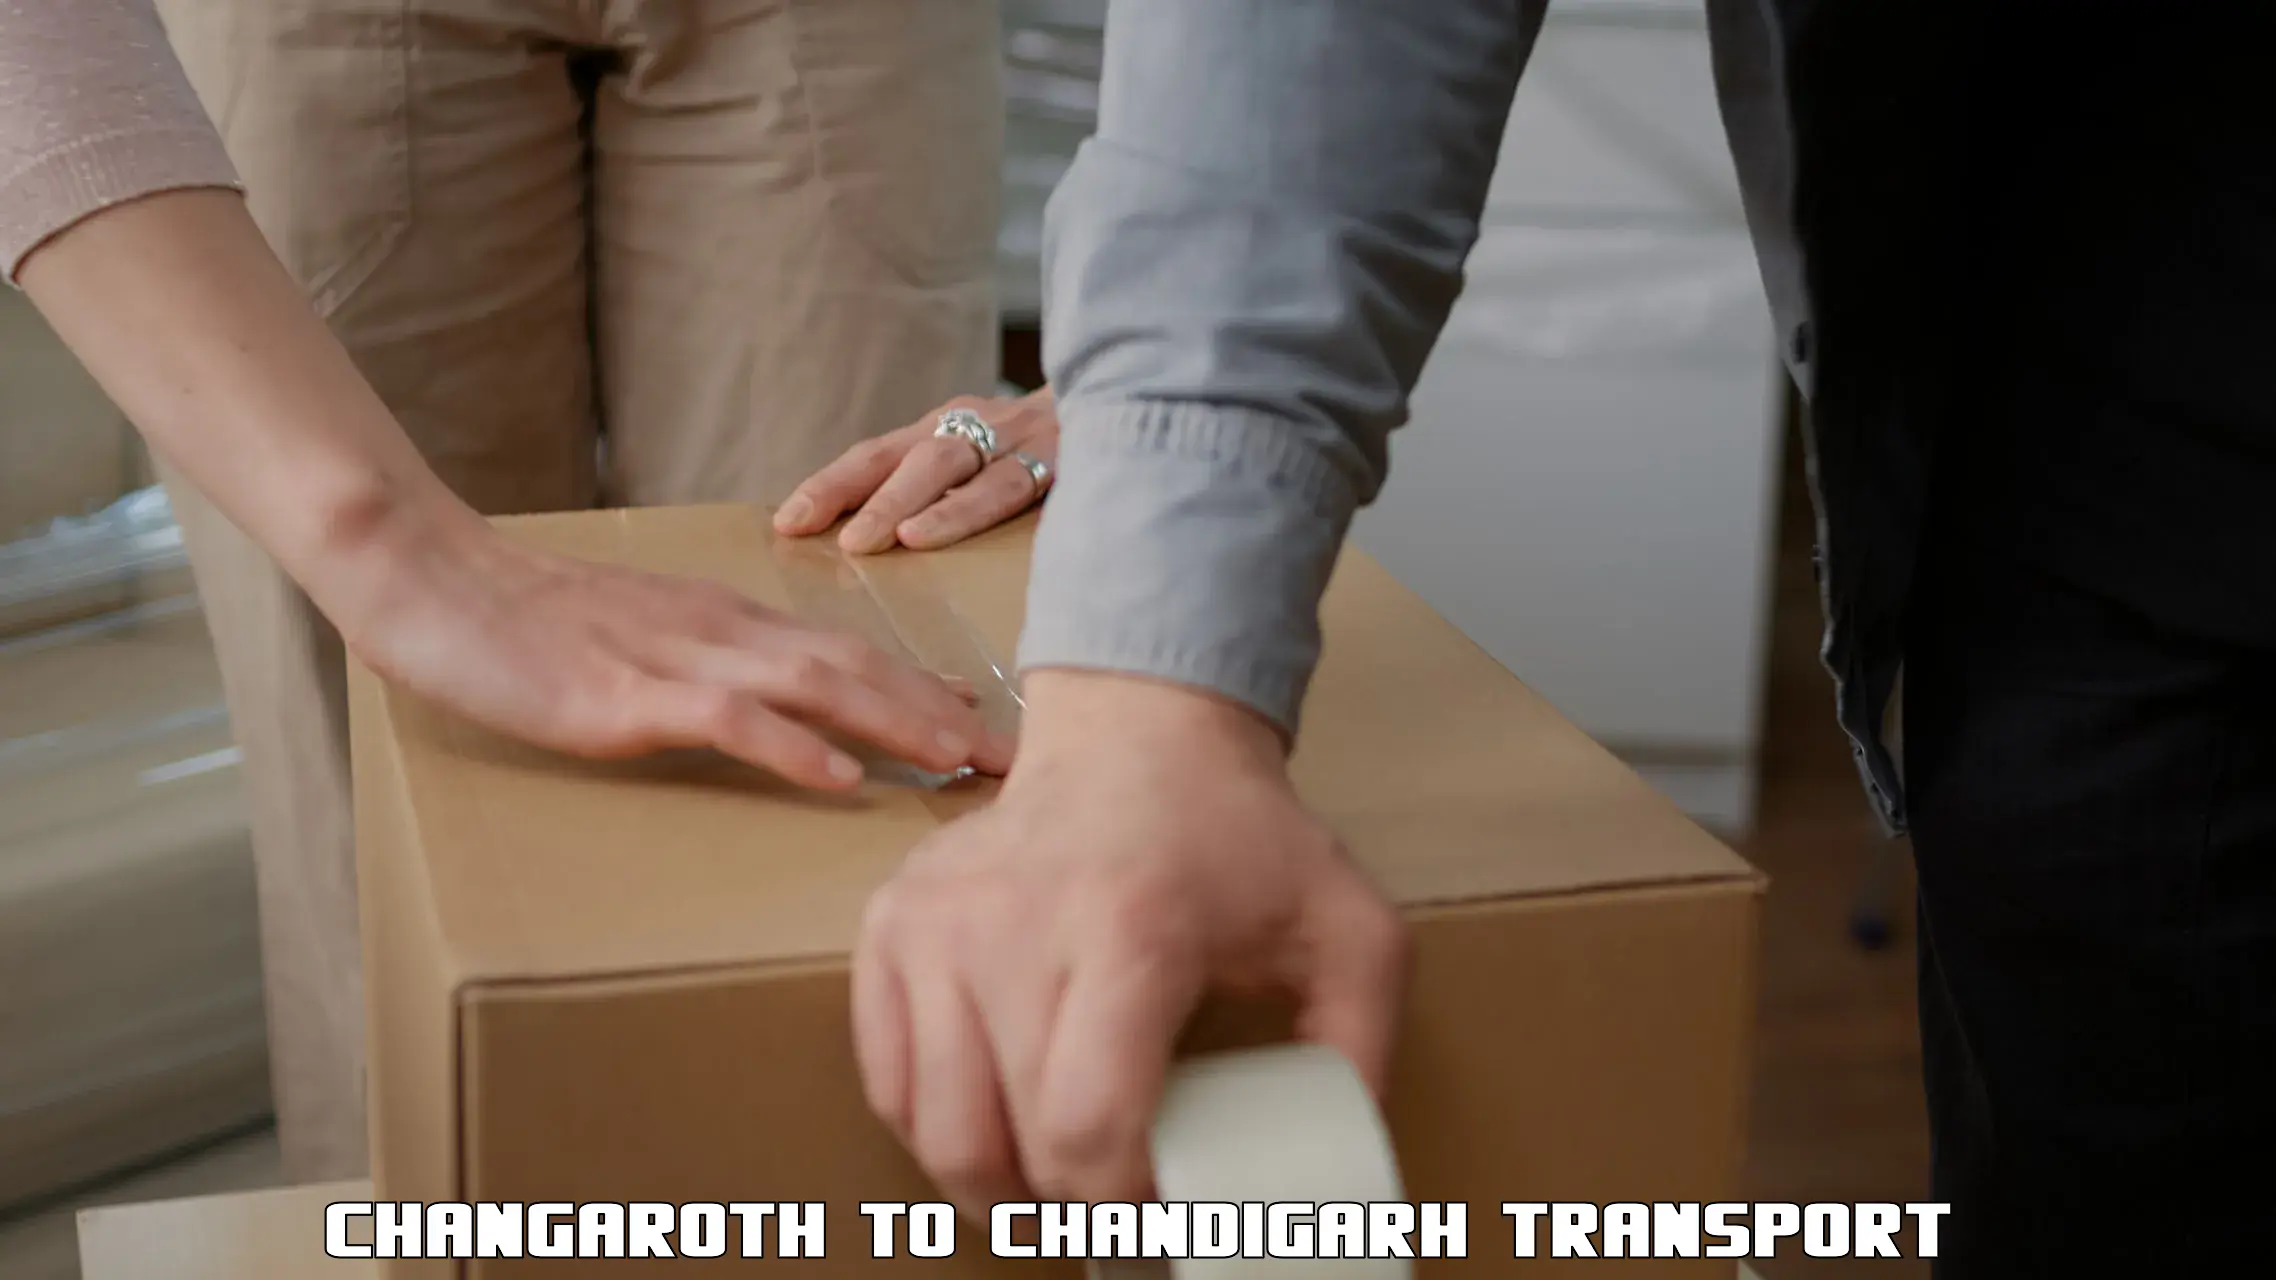 Container transport service Changaroth to Chandigarh